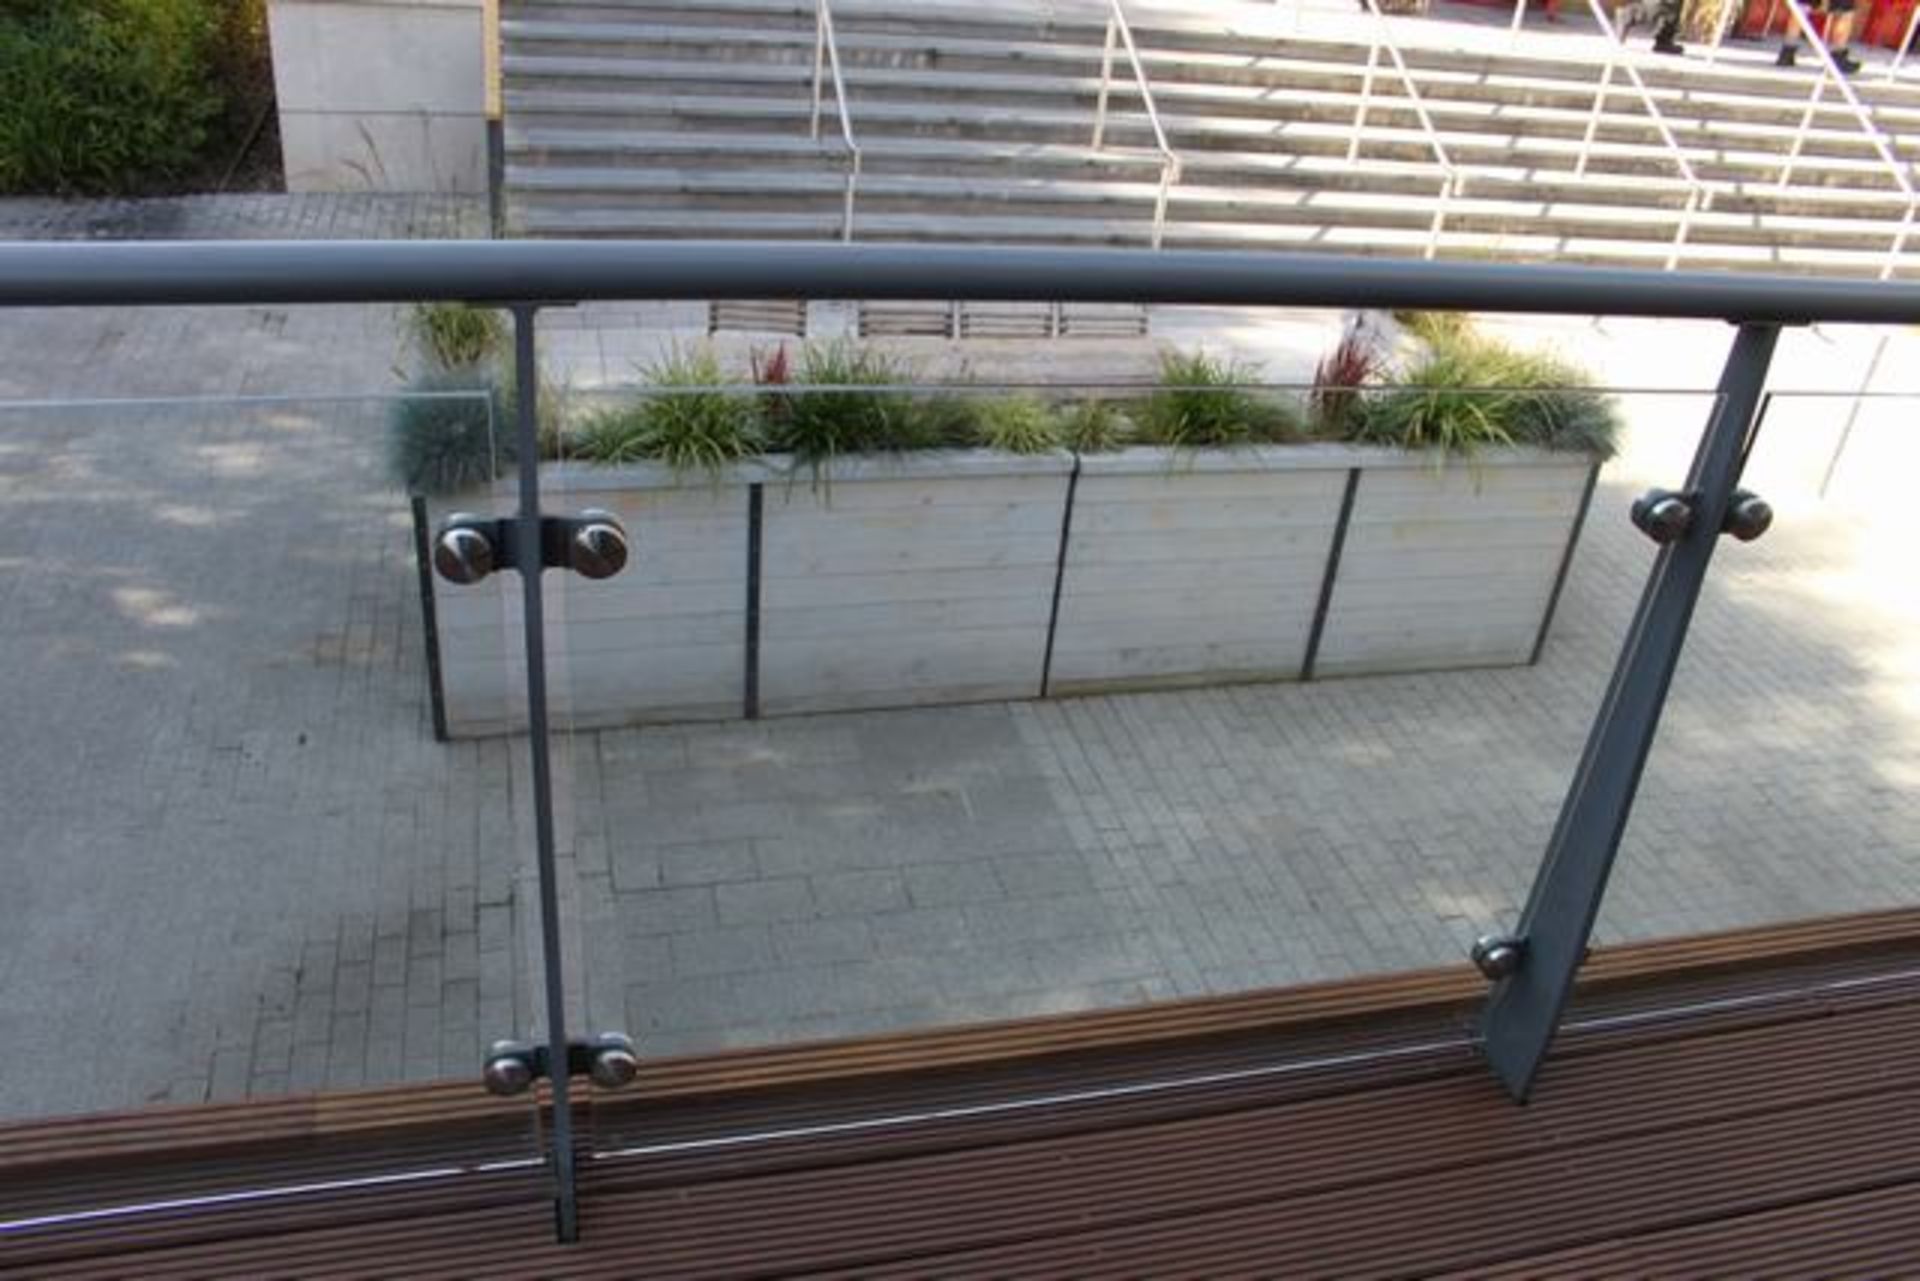 2 x Toughened glass balustrade panels 1040 x 950mm  ( this is glass panels only to bid for the